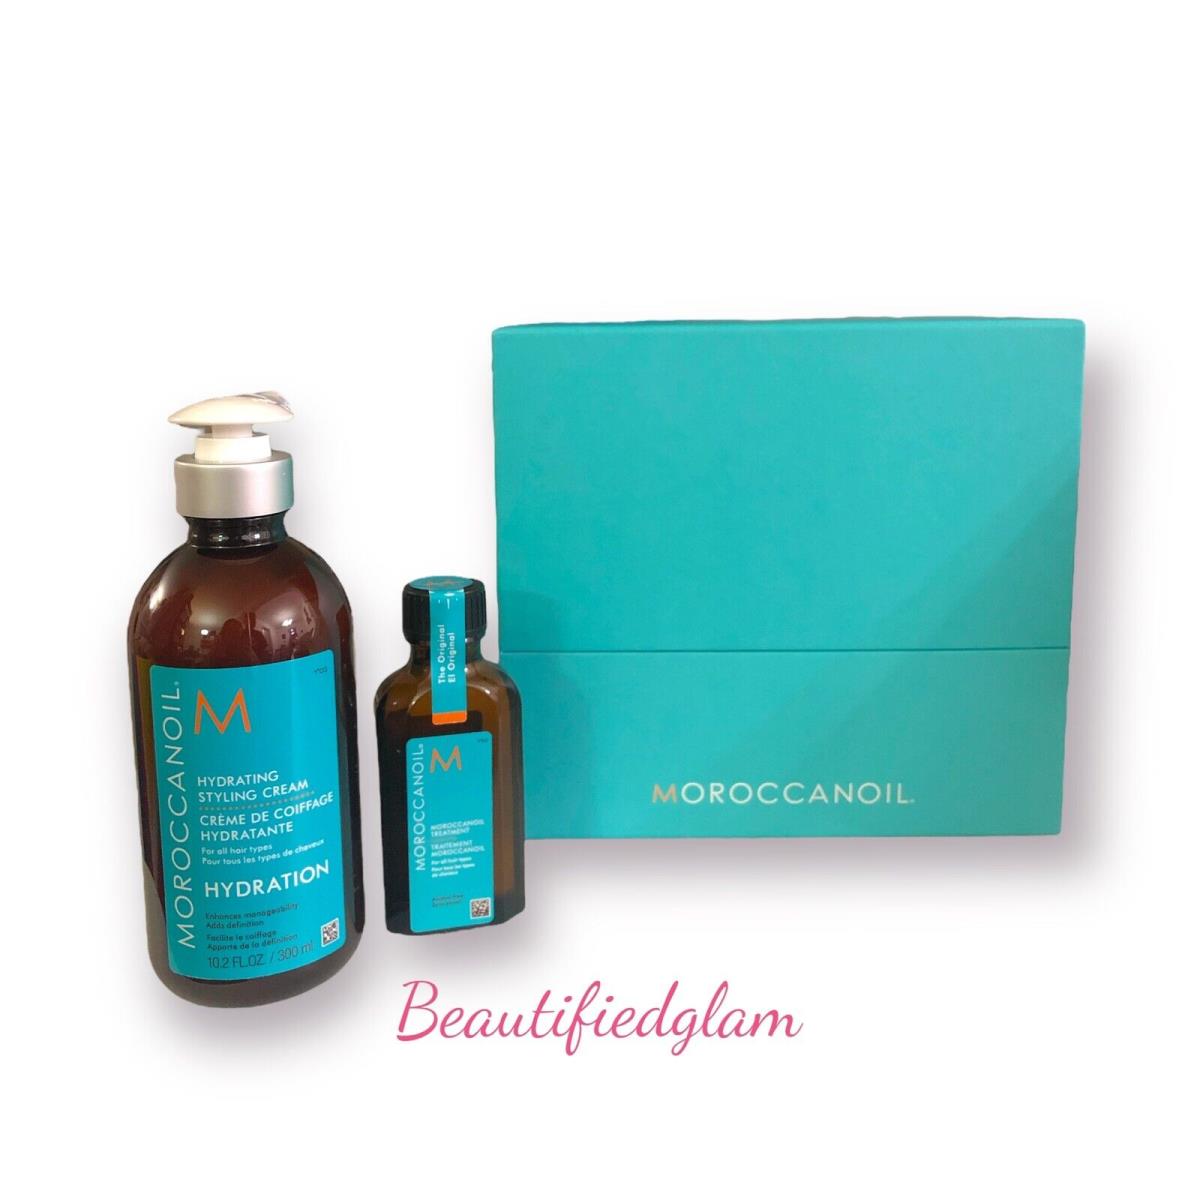 Moroccanoil Treatment Hydrating Styling Cream Hair Set OF 2